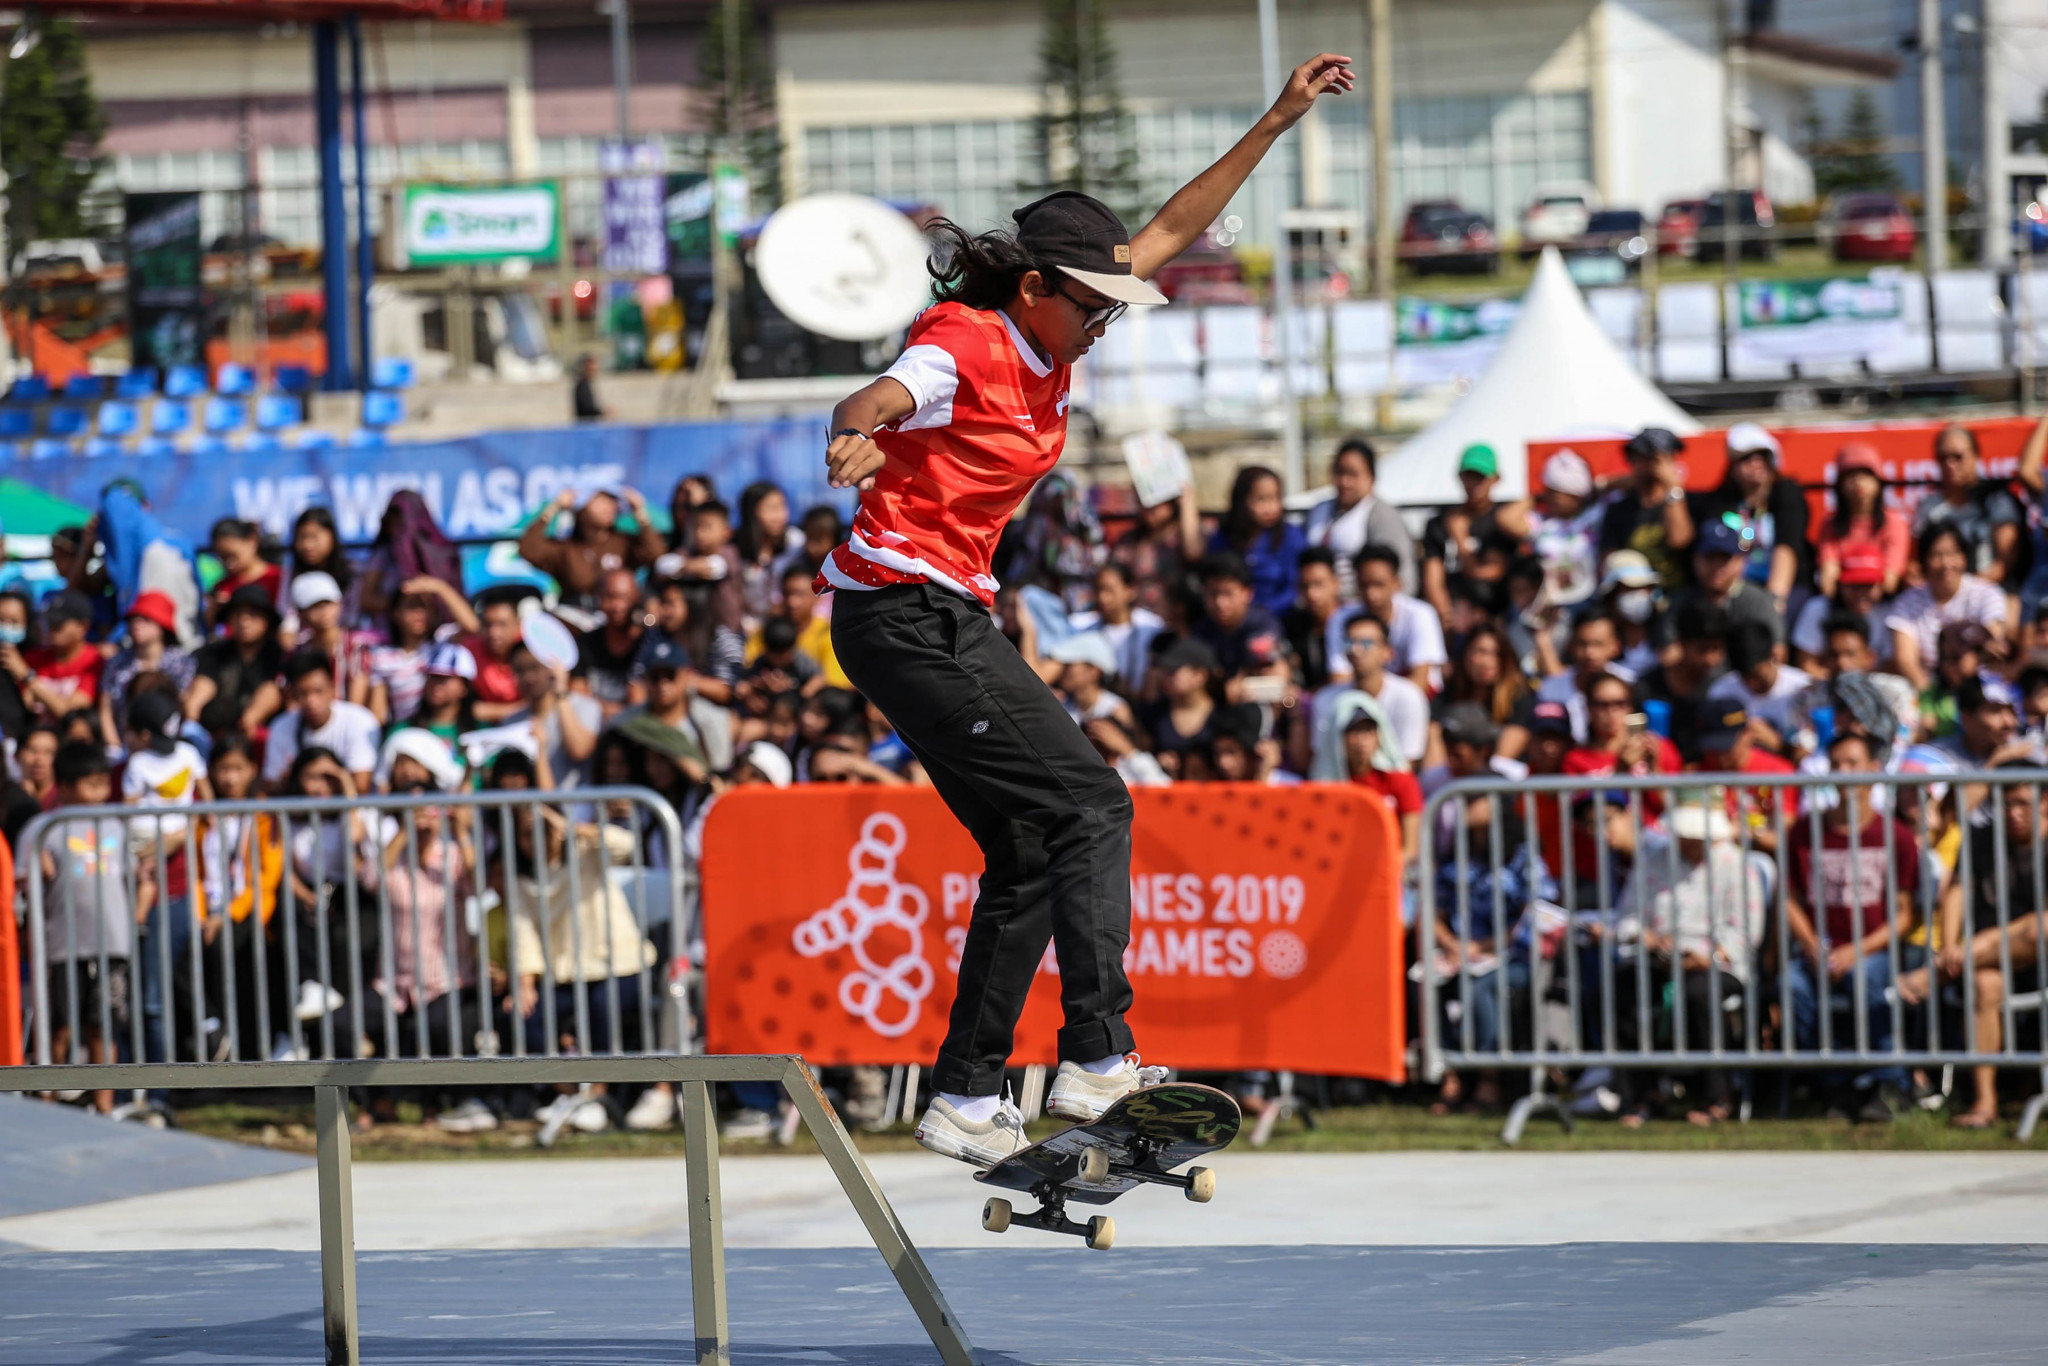 Organisers of this month's Asian Street Skateboarding Continental Championships in Singapore have advised participants to withhold travel plans due to the spread of coronavirus ©Getty Images